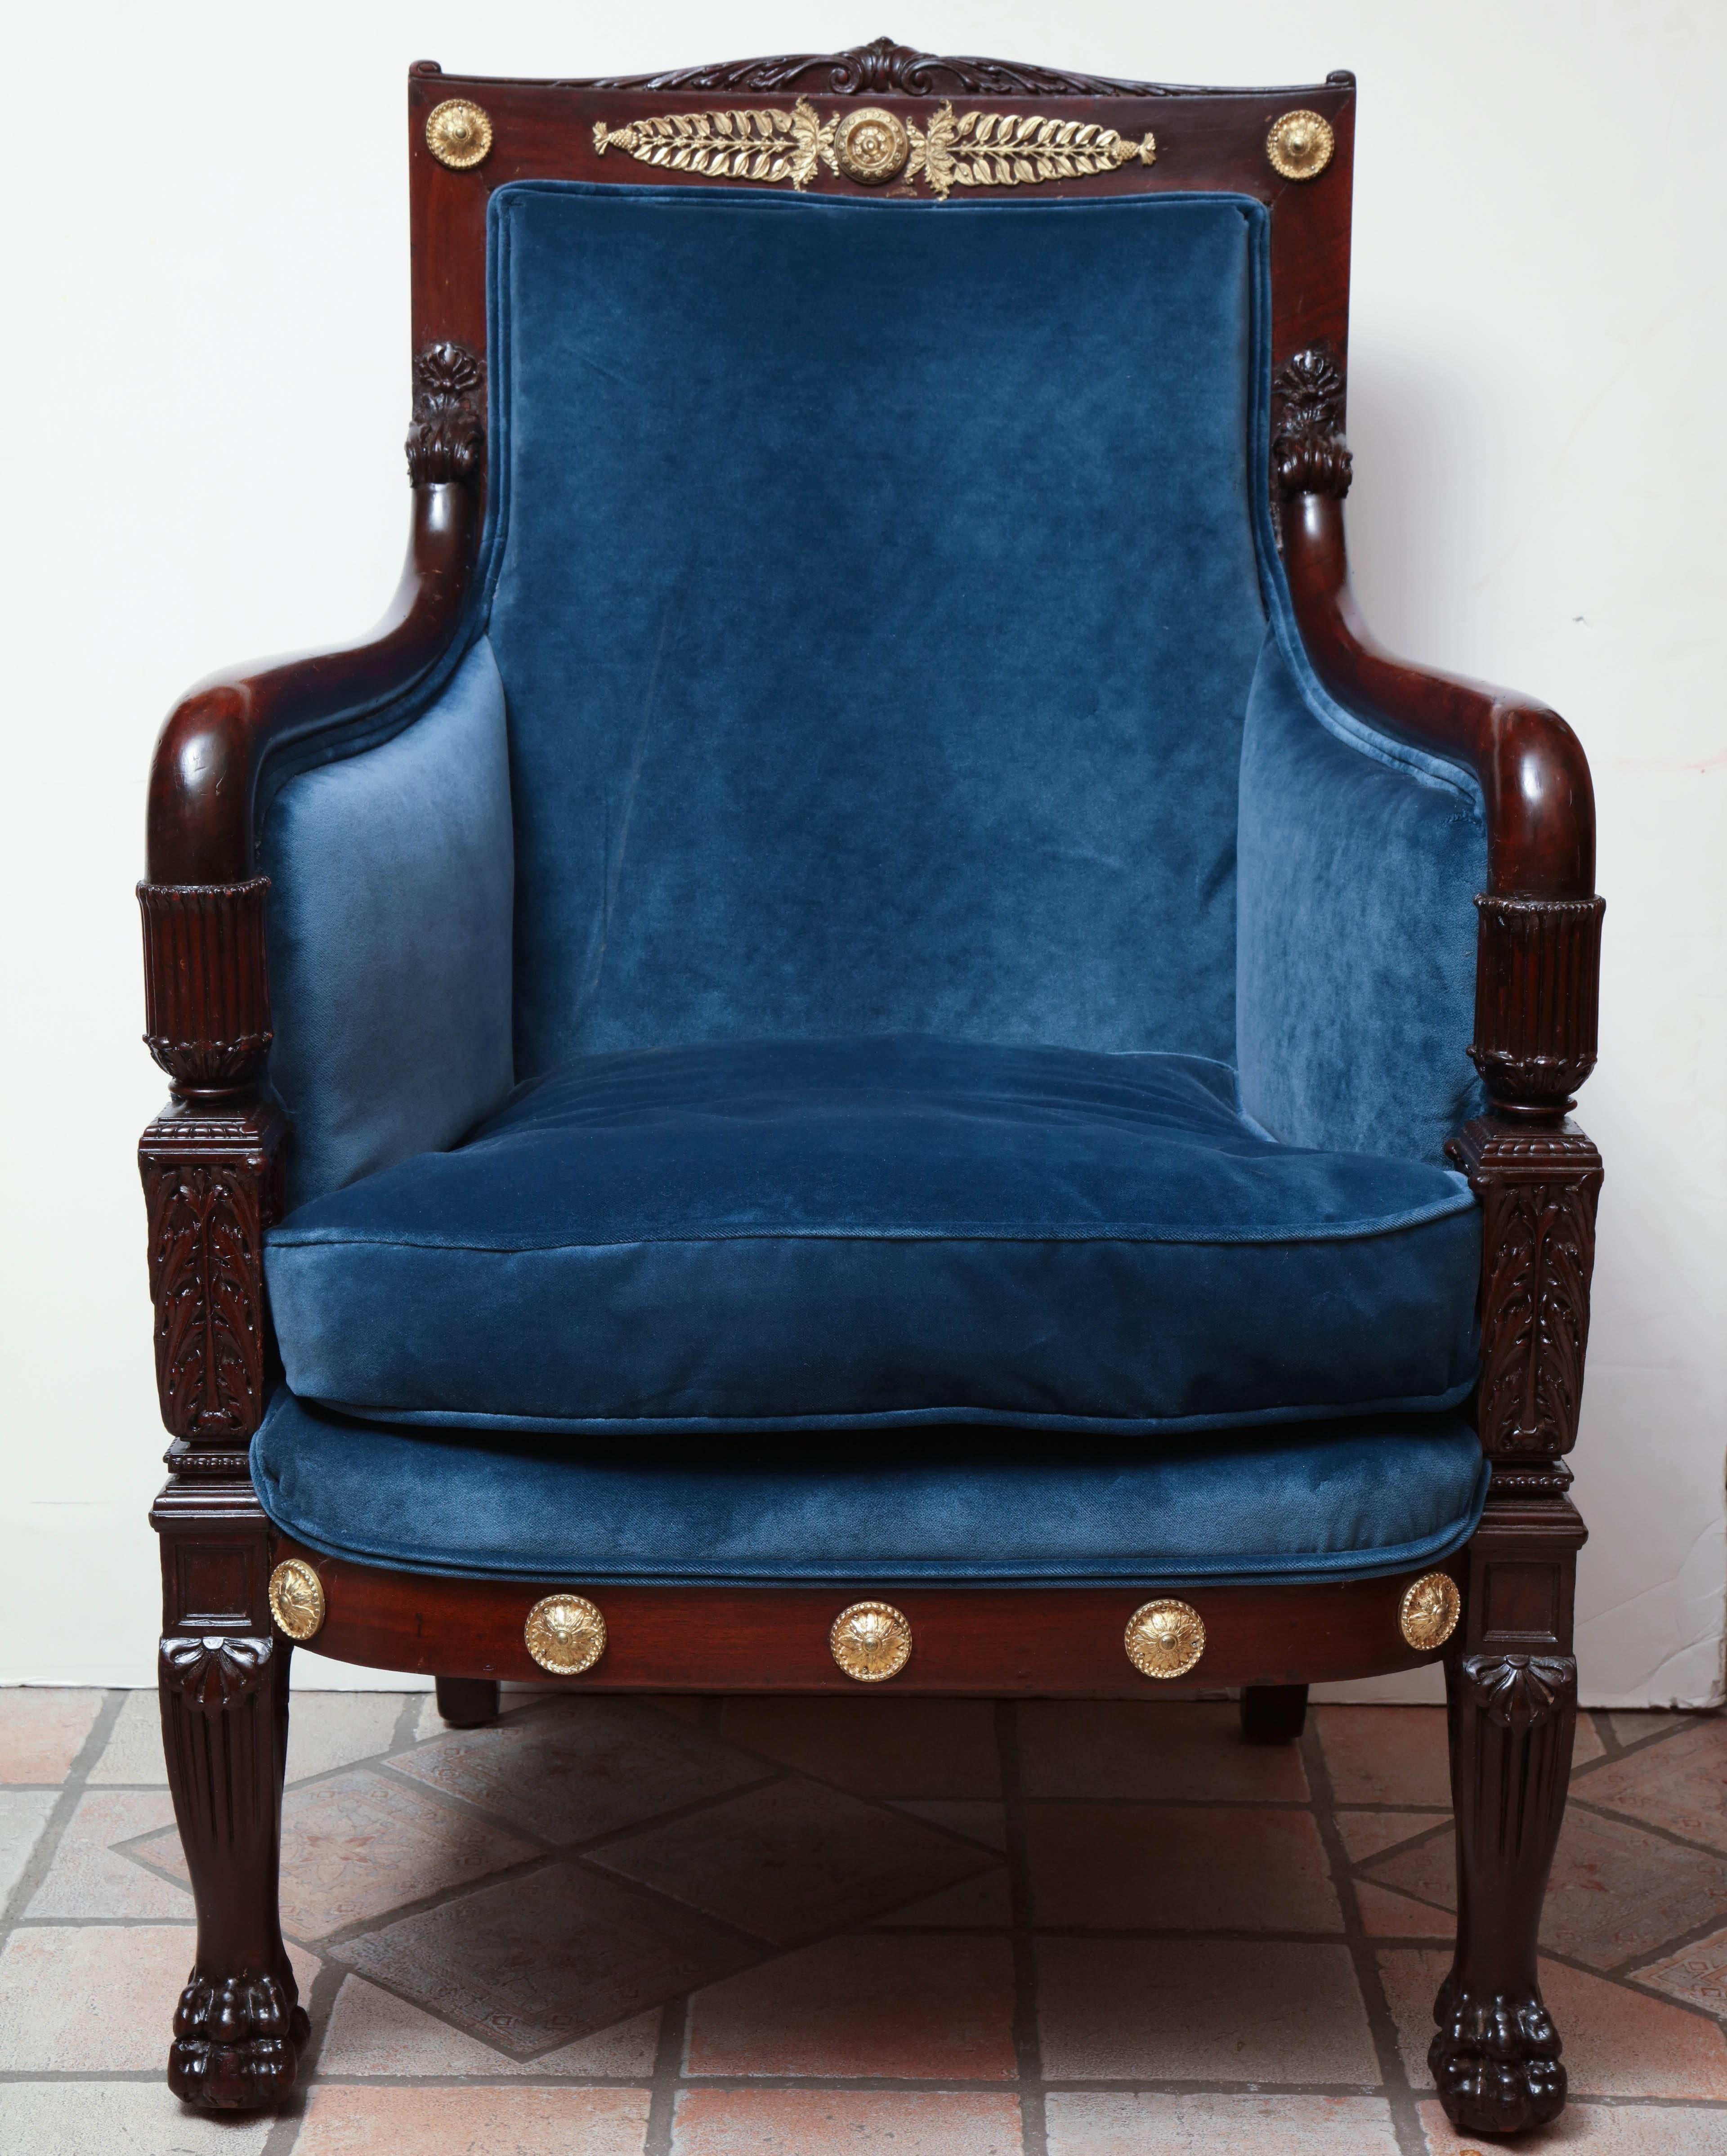 French Empire carved mahogany bergere armchair with bronze mounts and carved paw feet.